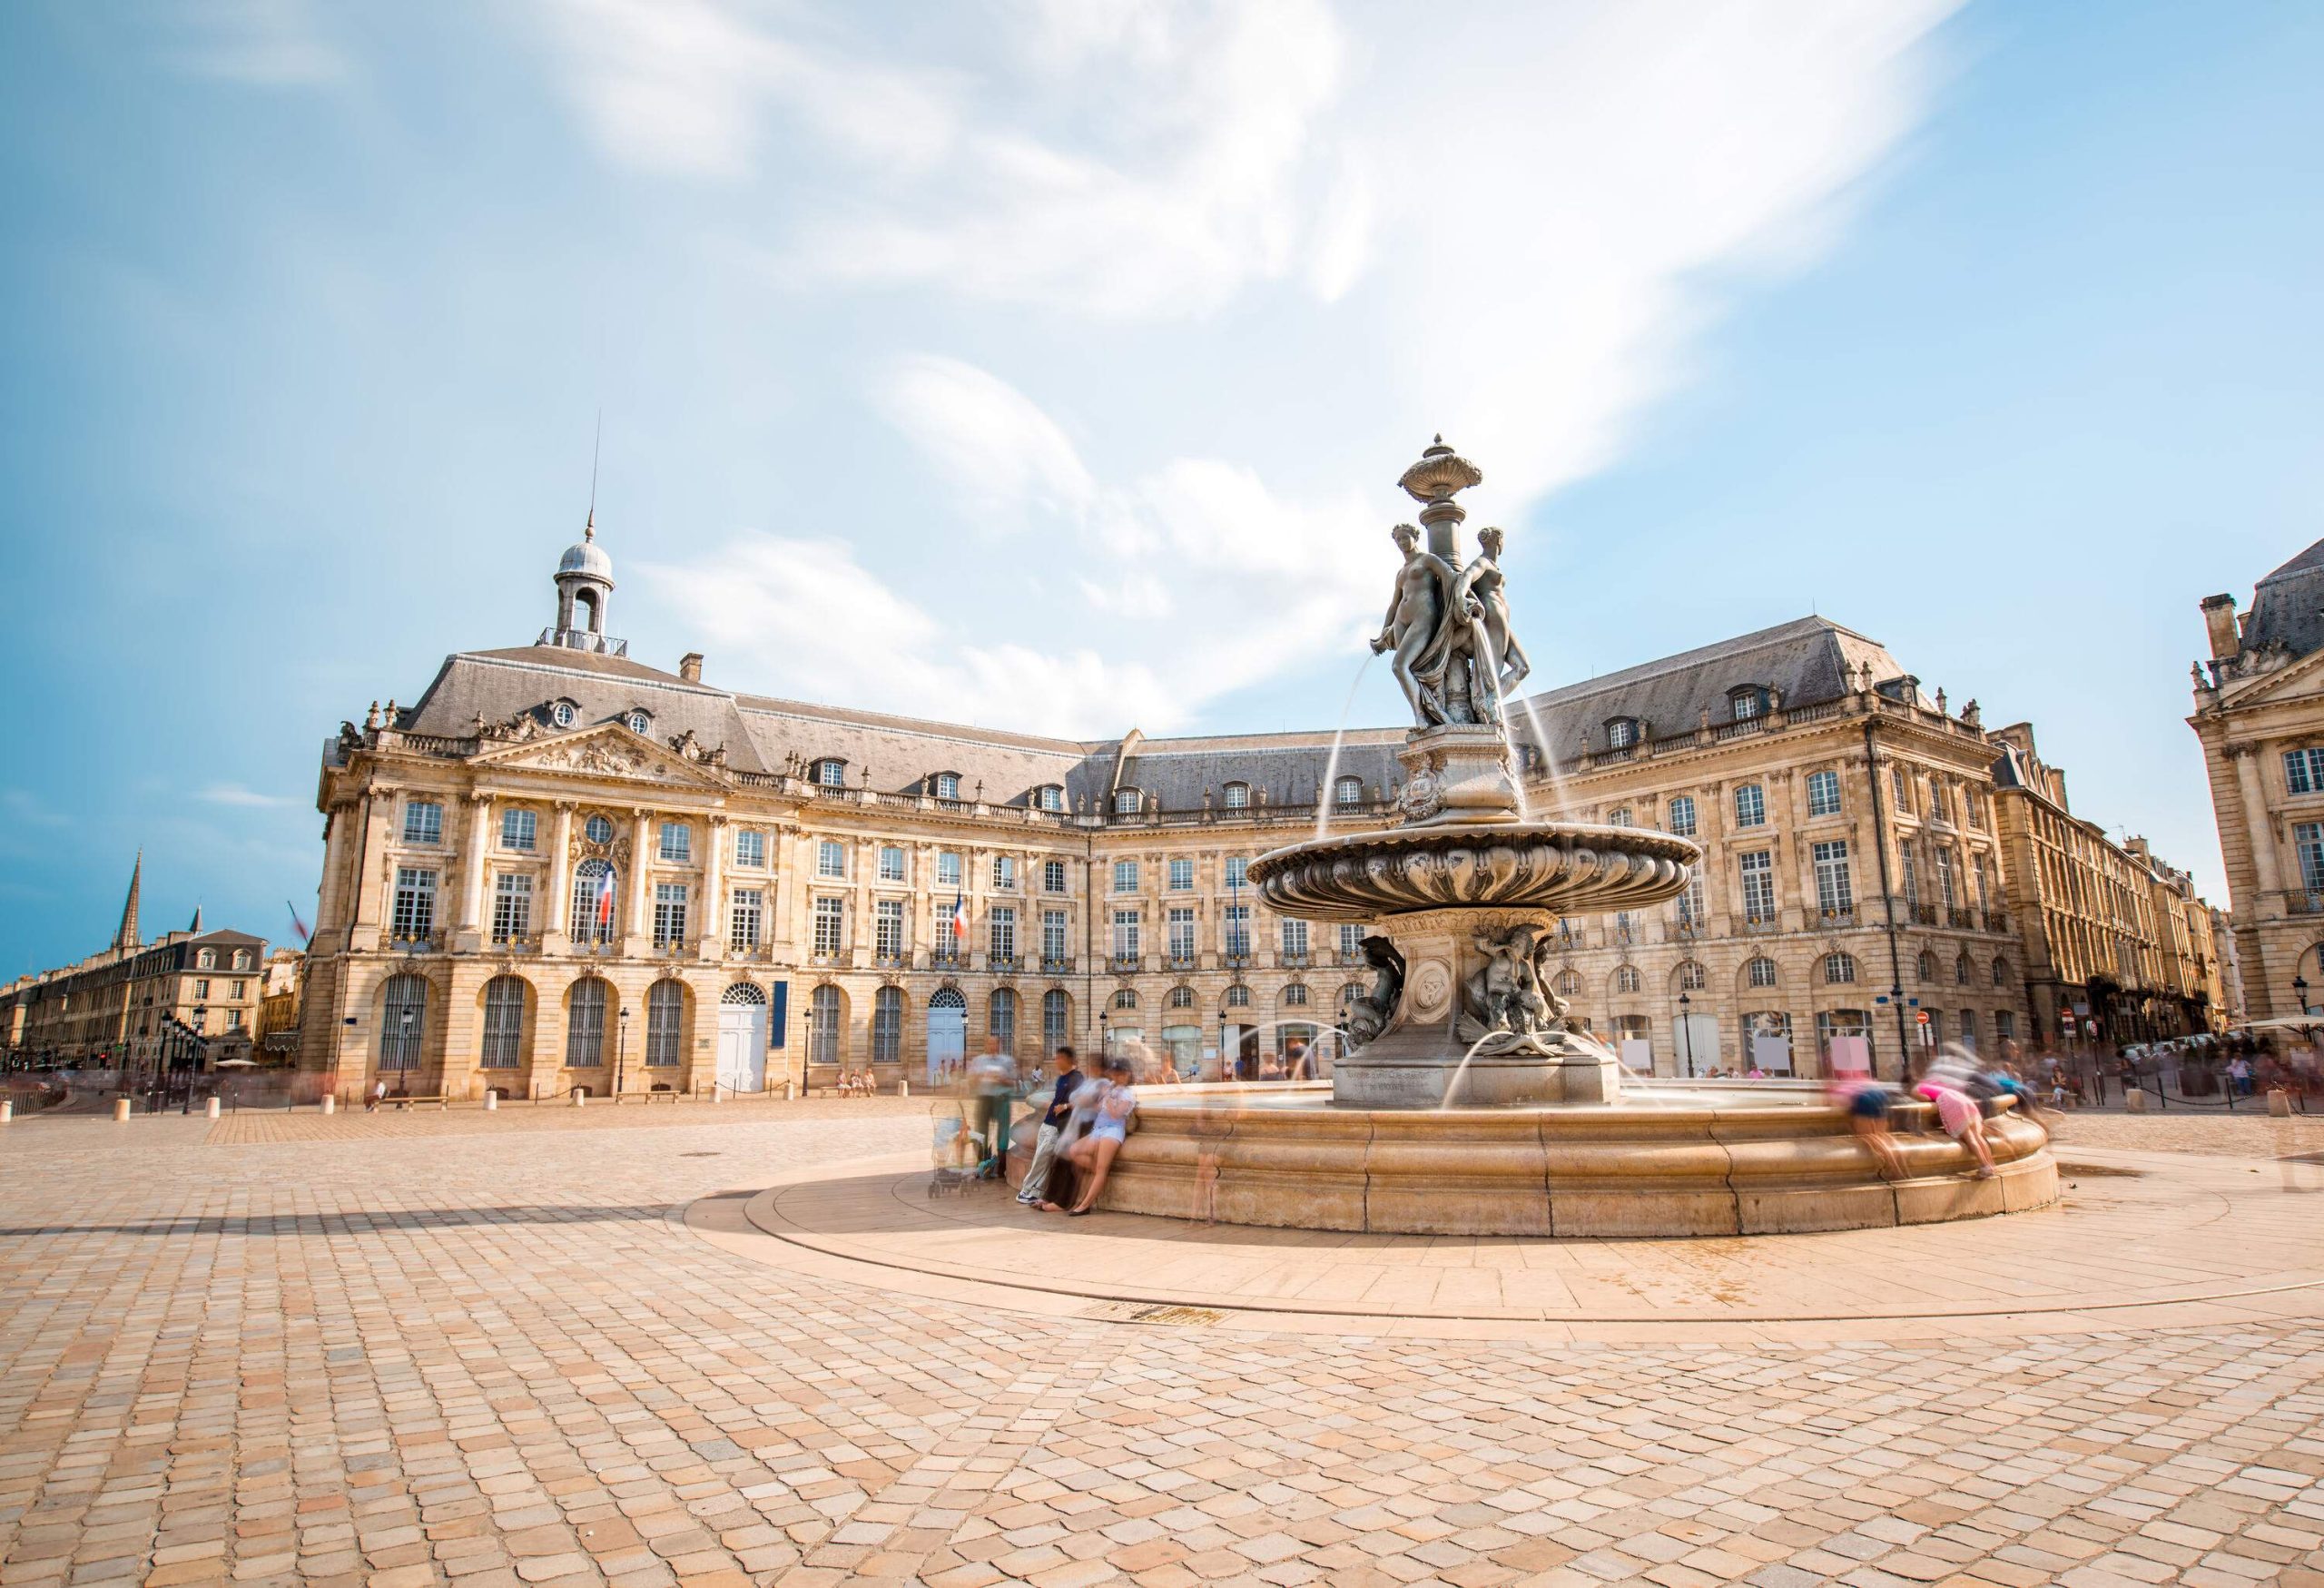 The Three Graces Fountain in the middle of the La Bourse square with the Palais de la Bourse in the background.